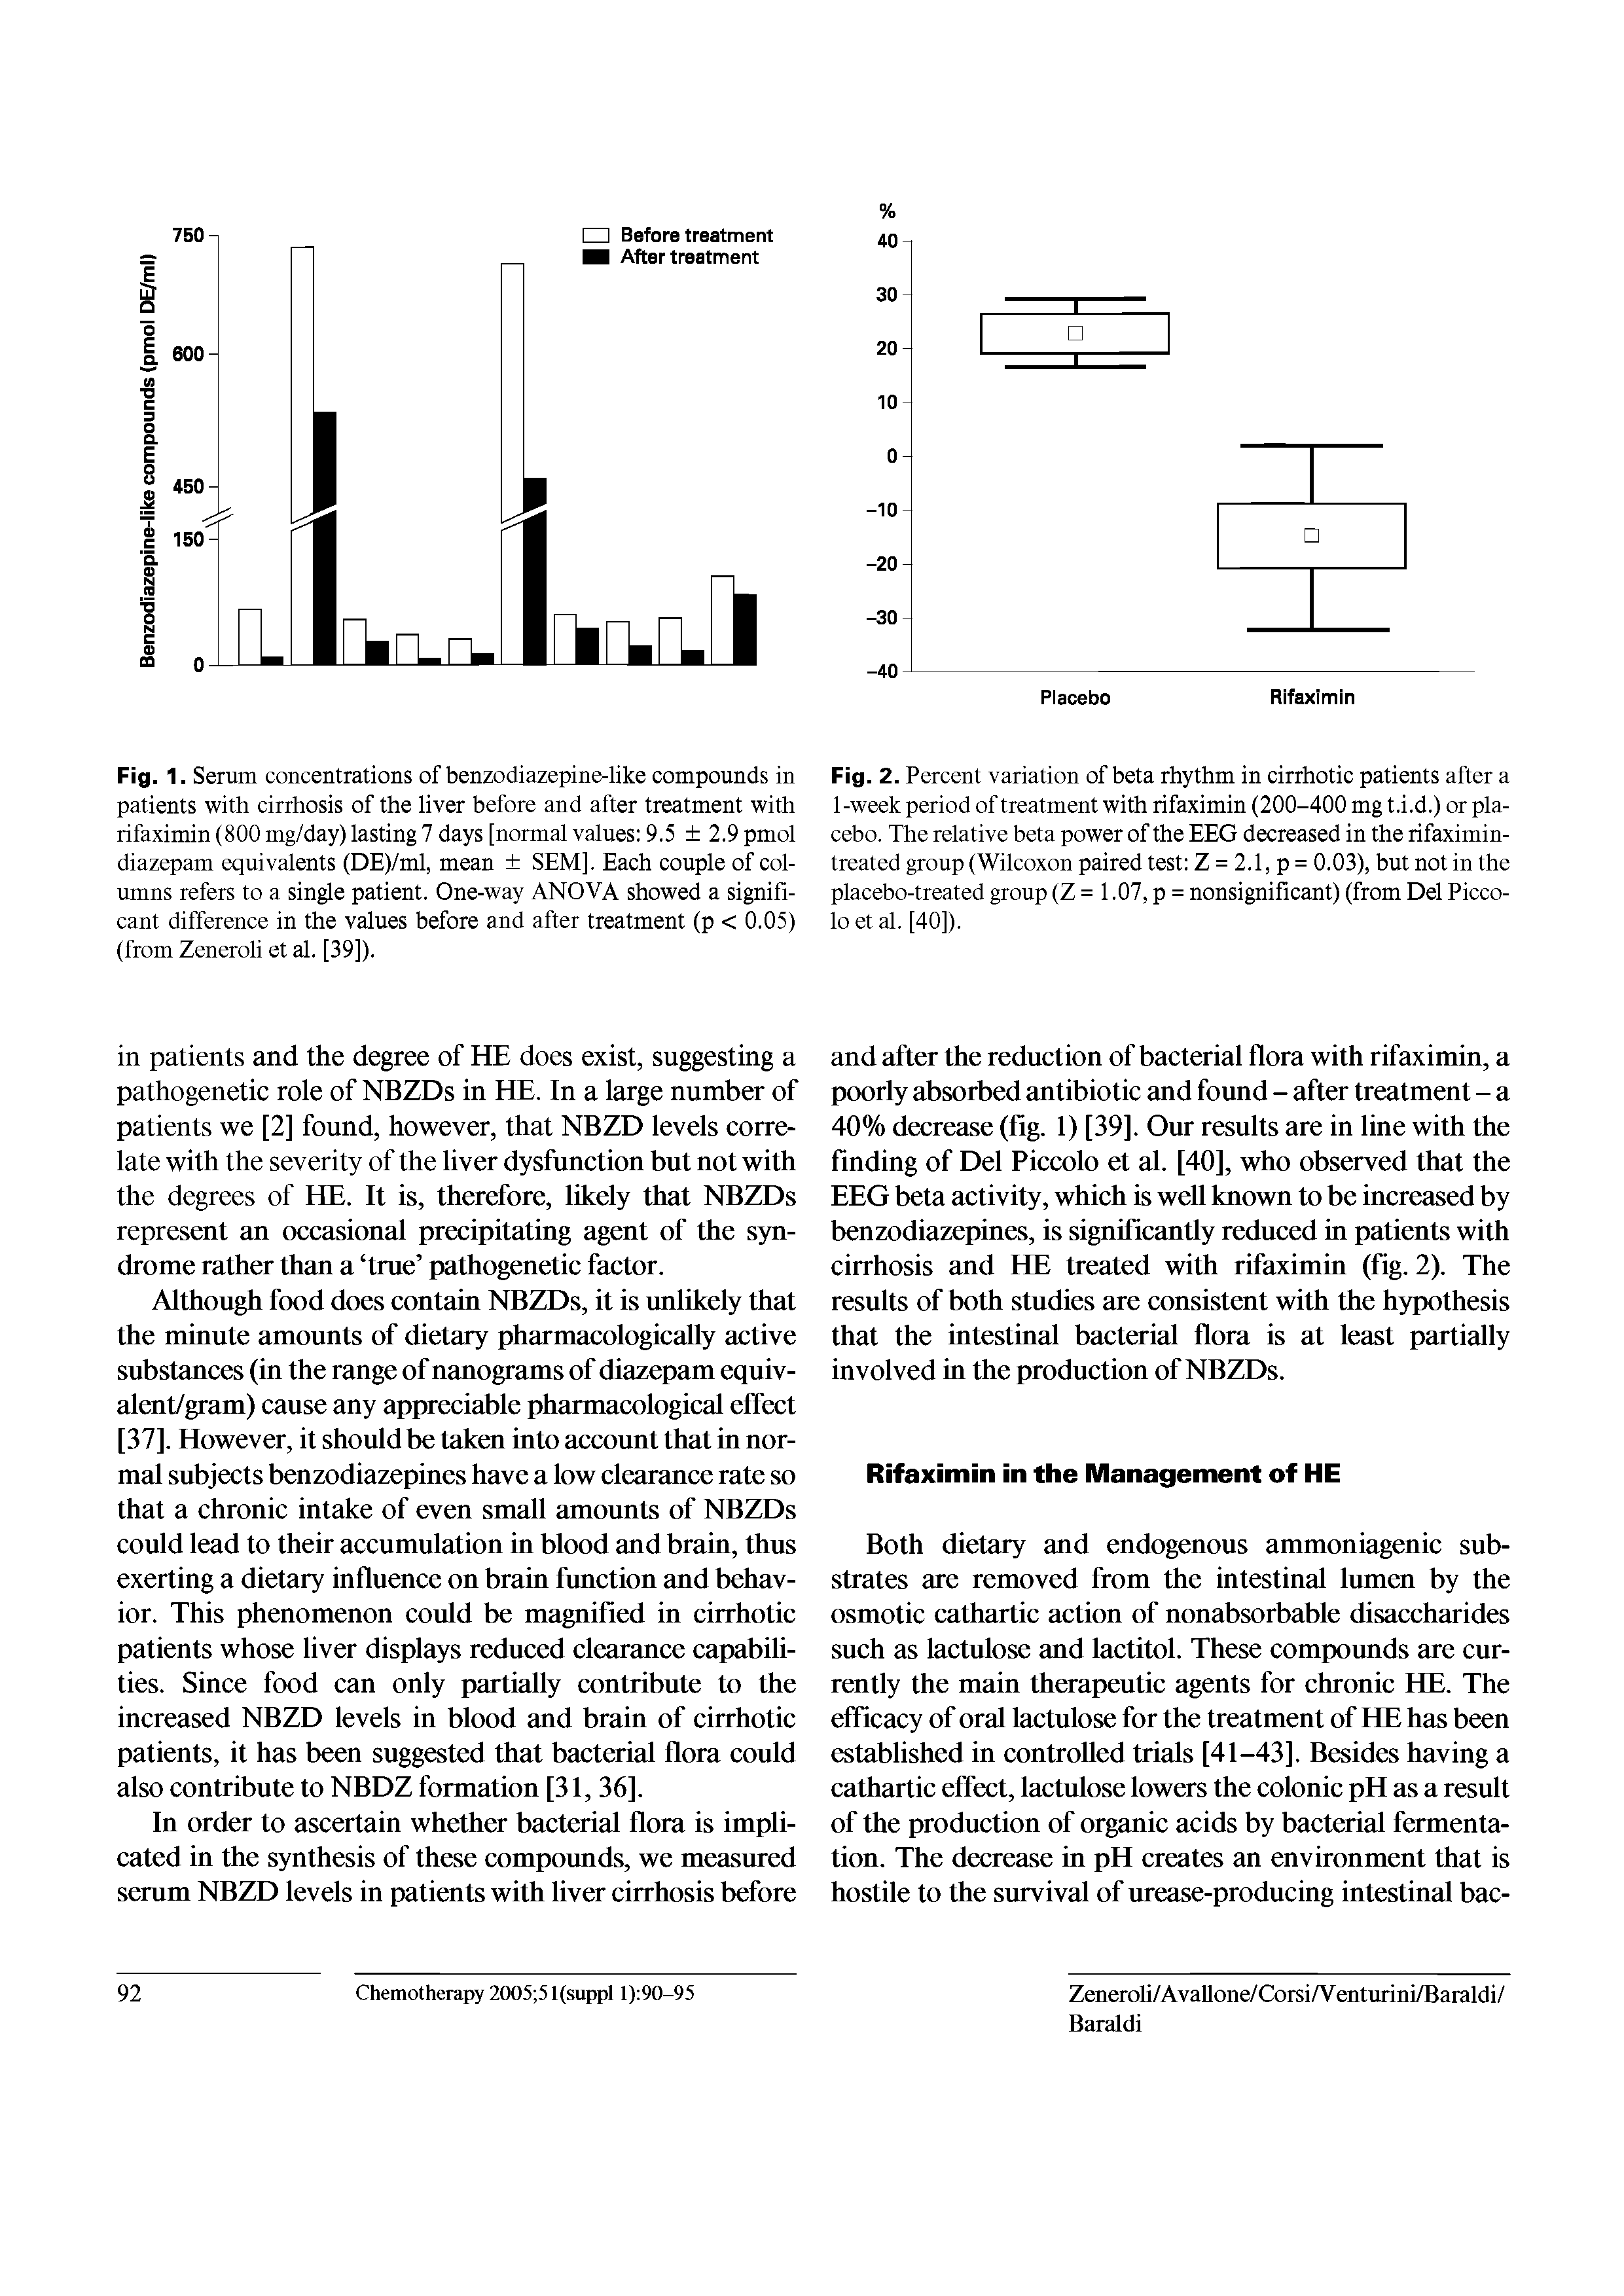 Fig. 1. Serum concentrations of benzodiazepine-like compounds in patients with cirrhosis of the liver before and after treatment with rifaximin (800 mg/day) lasting 7 days [normal values 9.5 2.9 pmol diazepam equivalents (DE)/ml, mean SEM]. Each couple of columns refers to a single patient. One-way ANOYA showed a significant difference in the values before and after treatment (p < 0.05) (from Zeneroli et al. [39]).